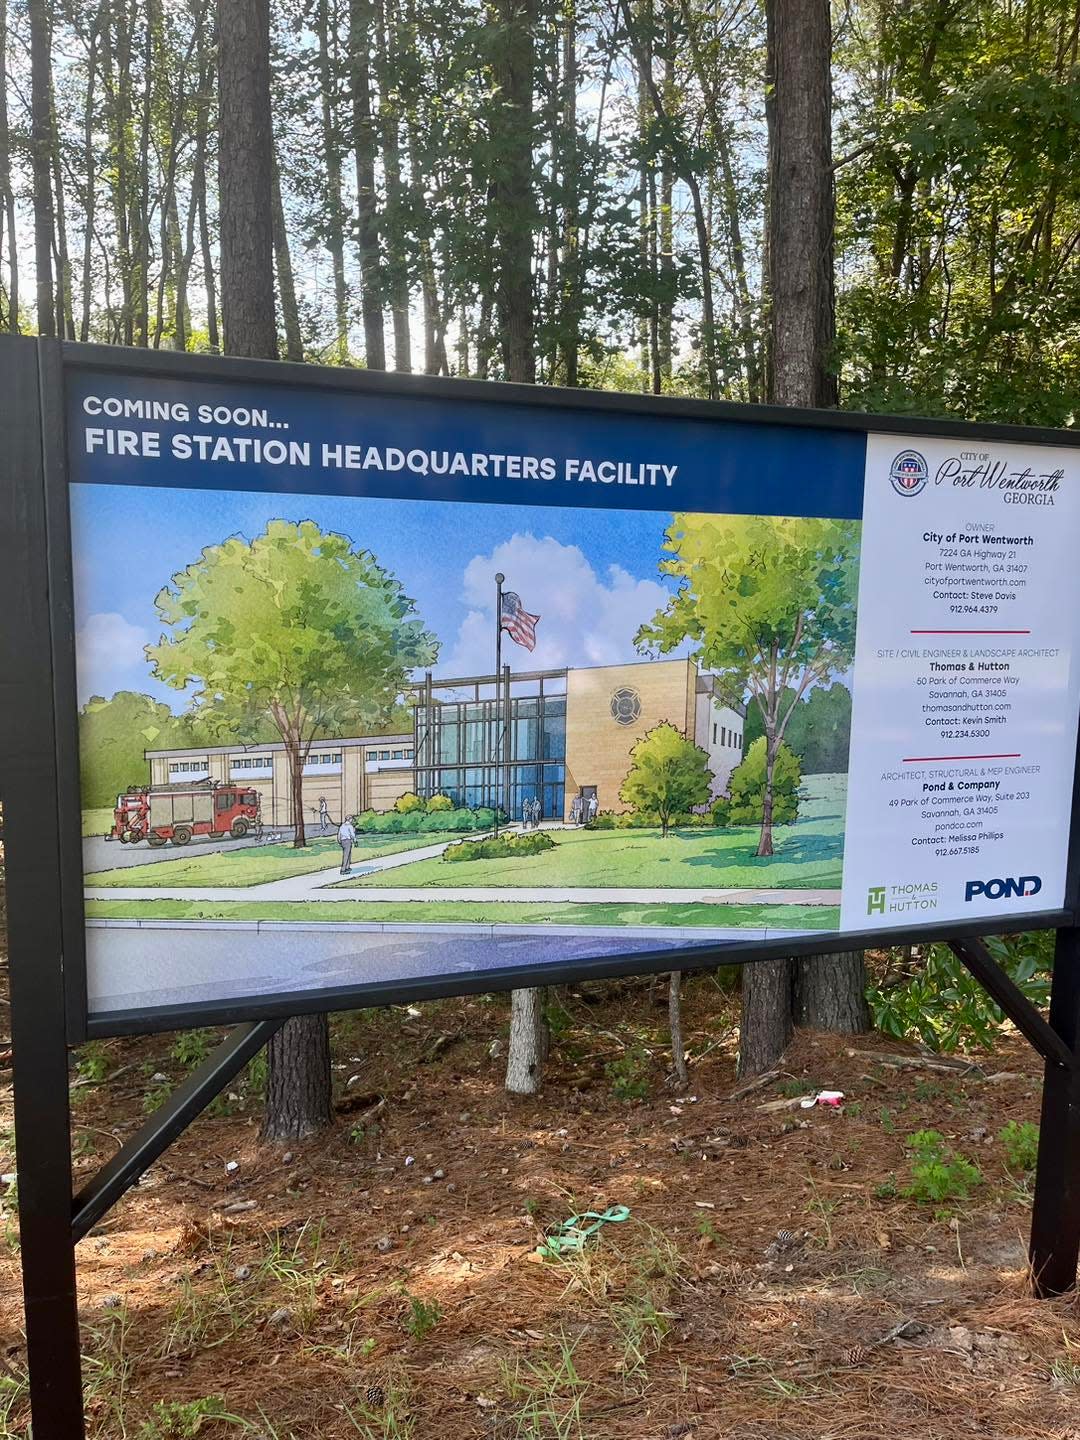 Port Wentworth clears land for new fire station.